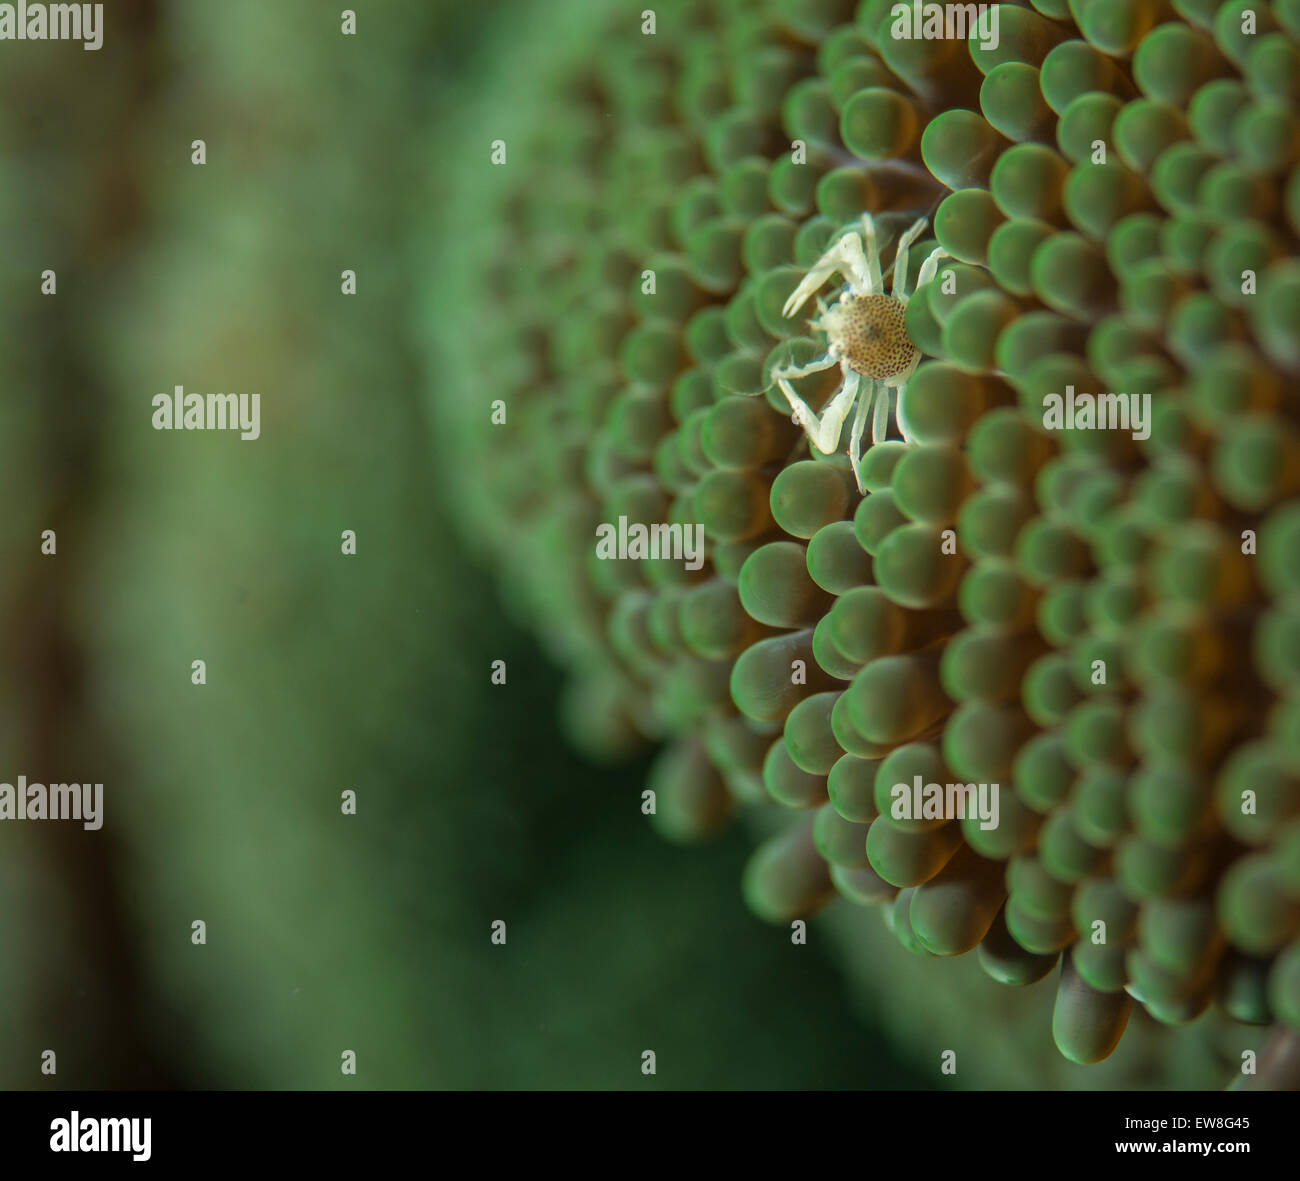 Baby porcelain crab in an anemone Stock Photo